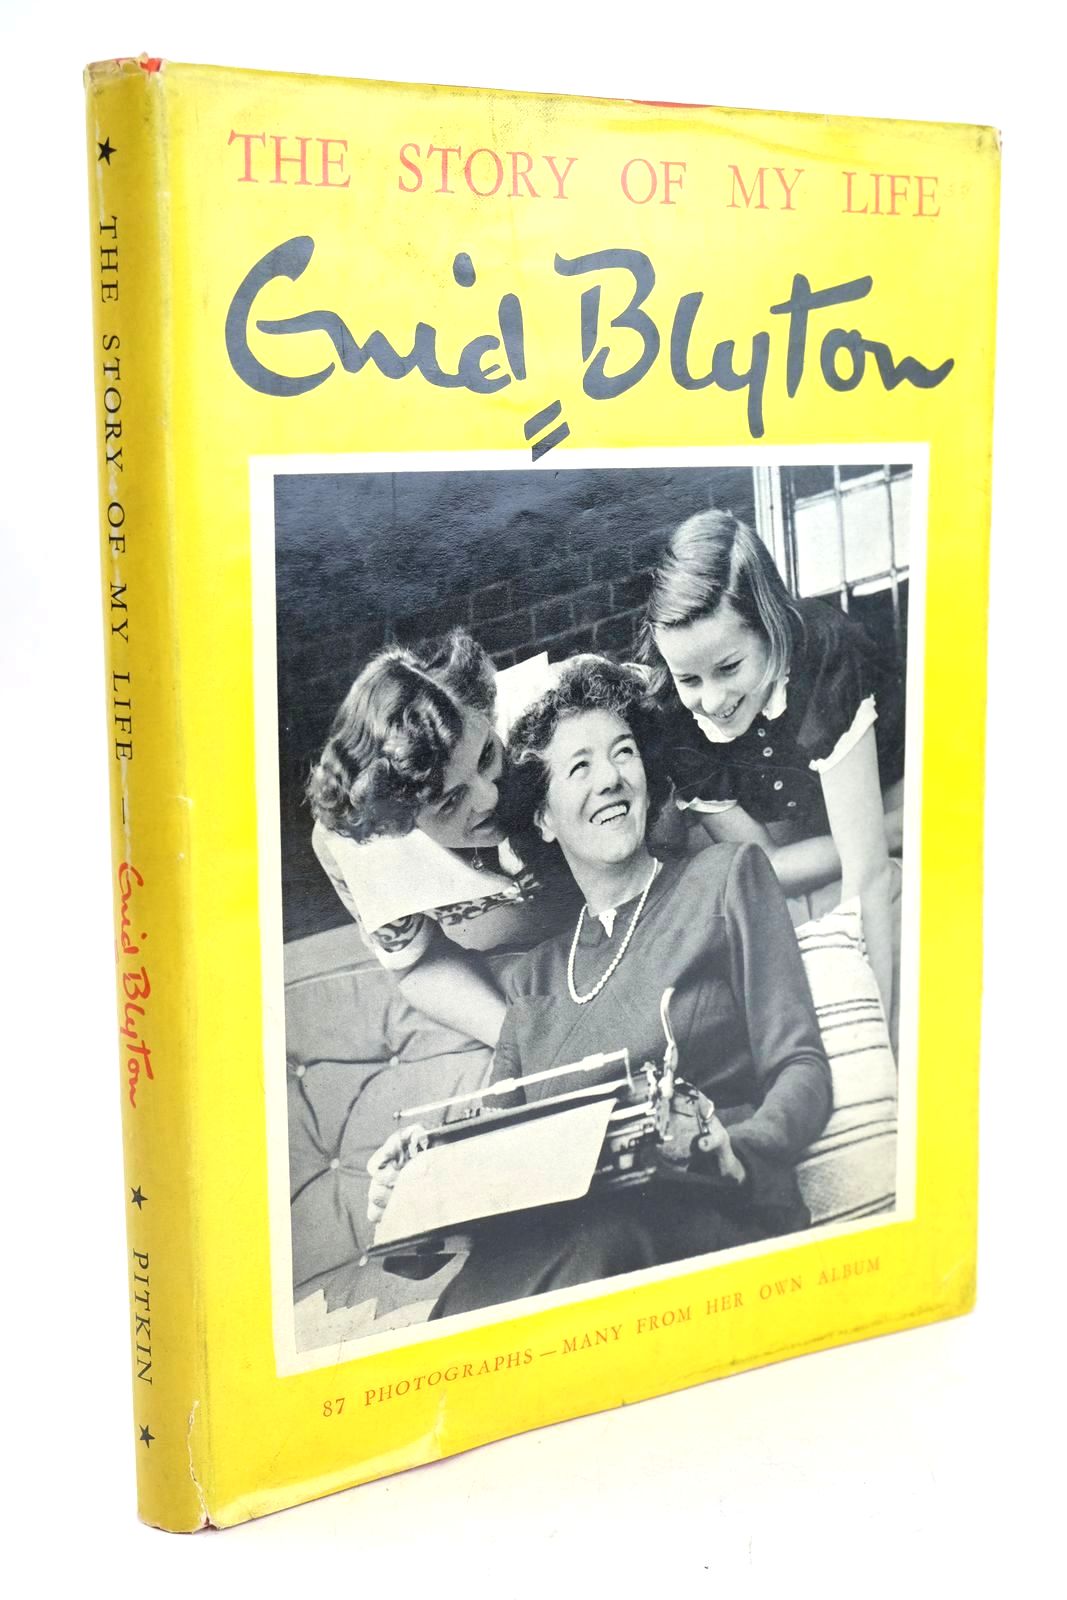 Photo of THE STORY OF MY LIFE written by Blyton, Enid published by Pitkins (STOCK CODE: 1326829)  for sale by Stella & Rose's Books